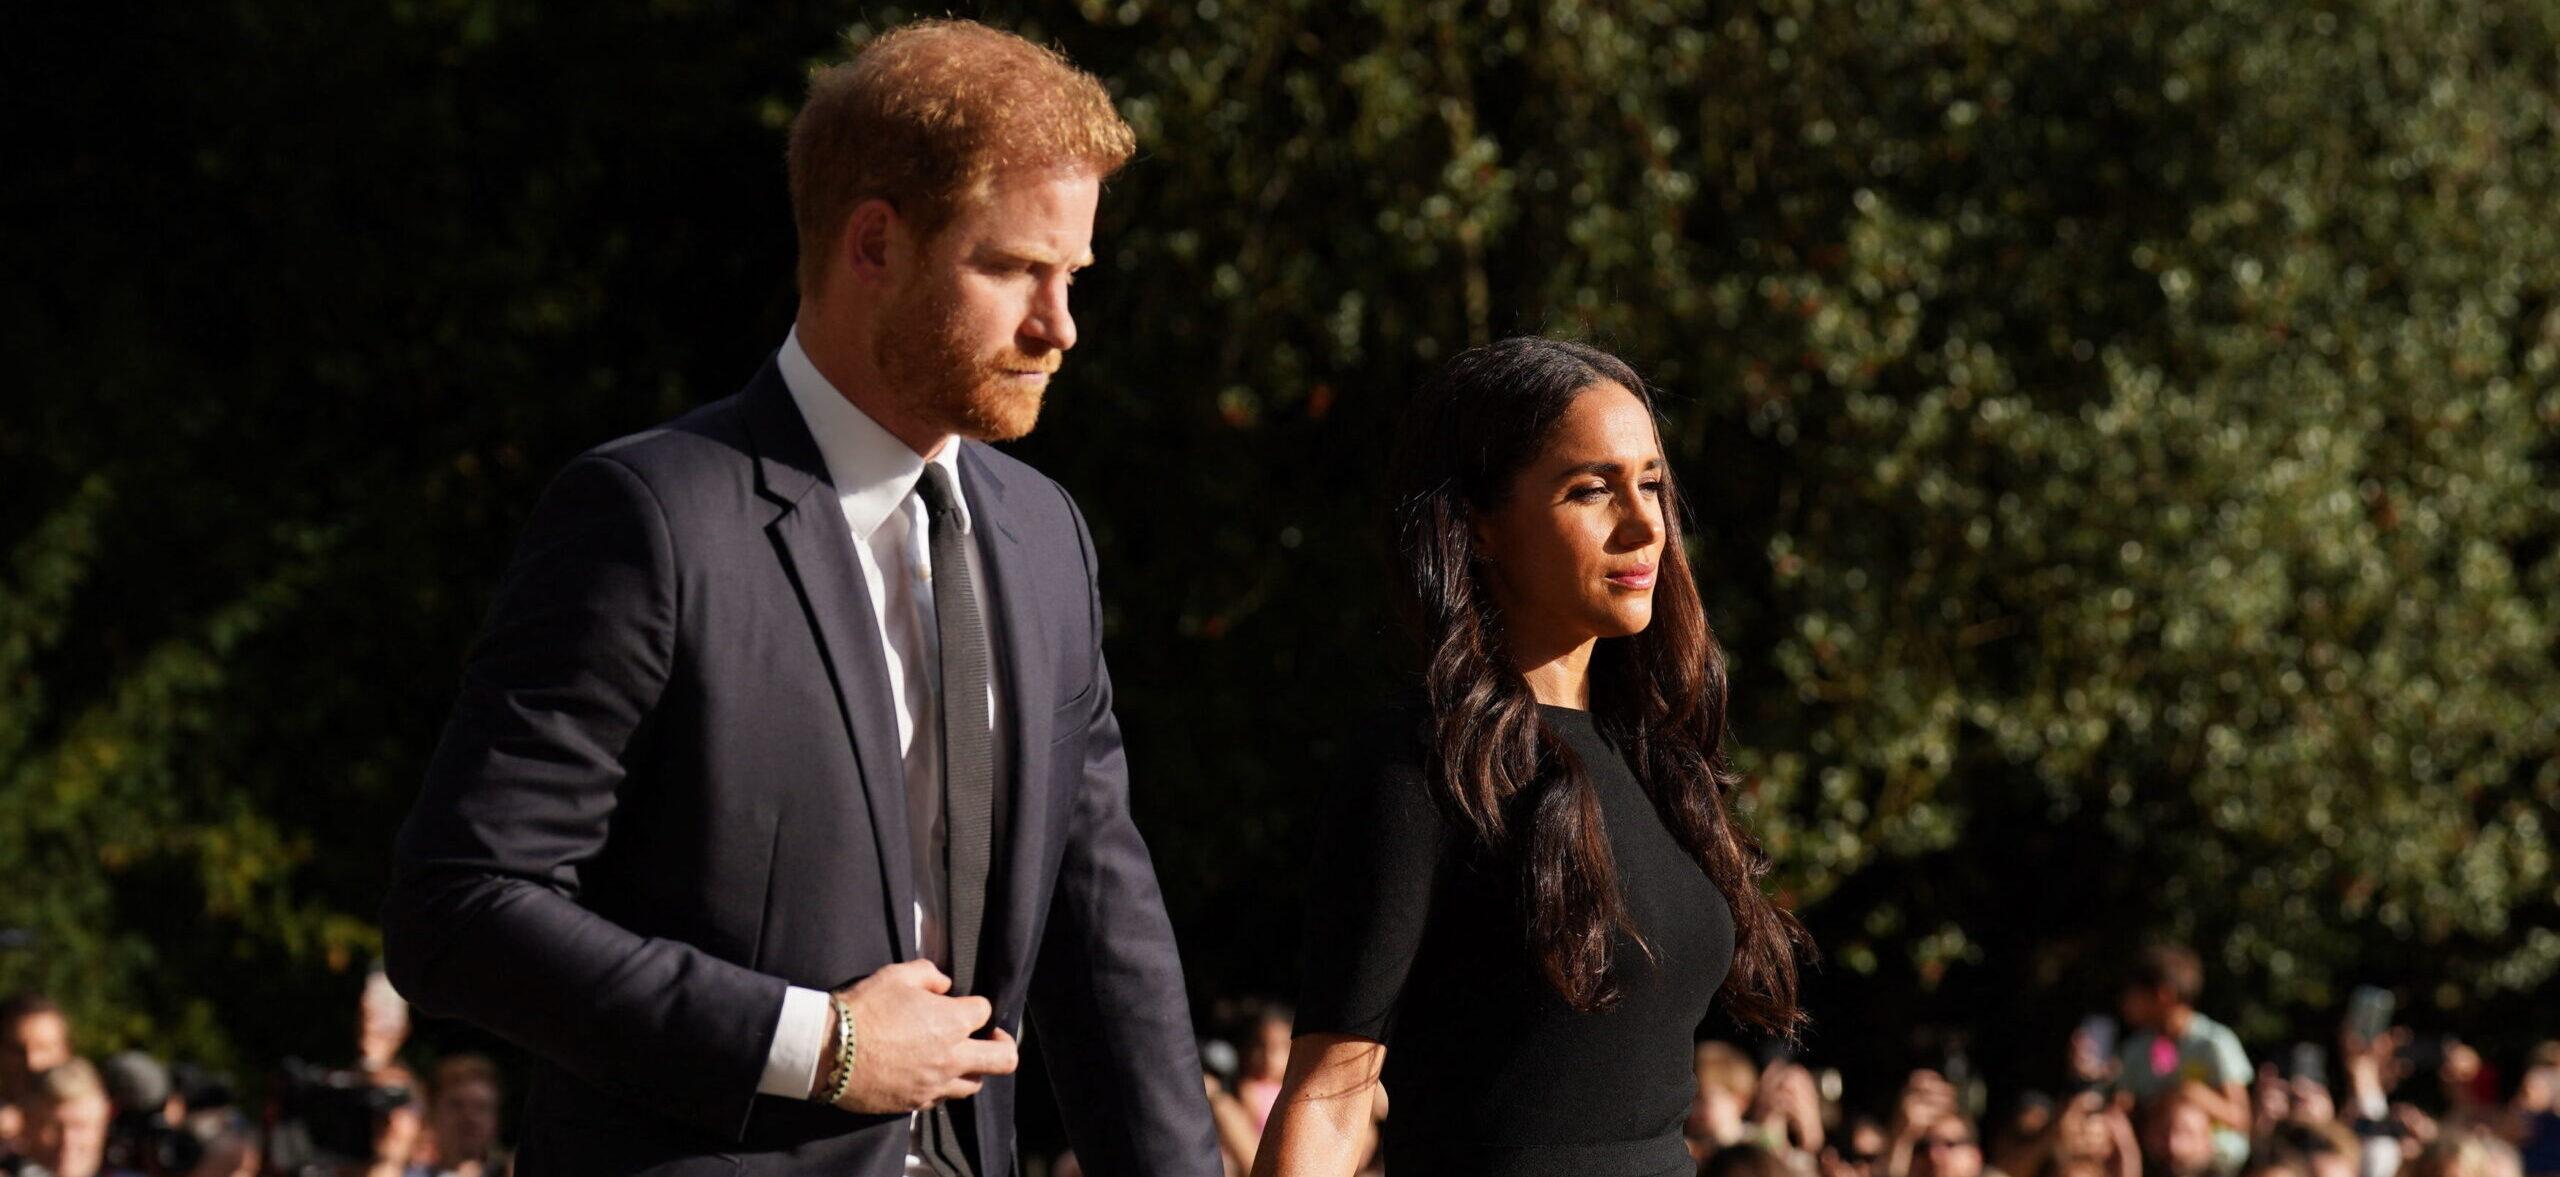 Harry & Meghan Dealt A Major Blow As Their Charity Is Labeled ‘Delinquent’ By California AG